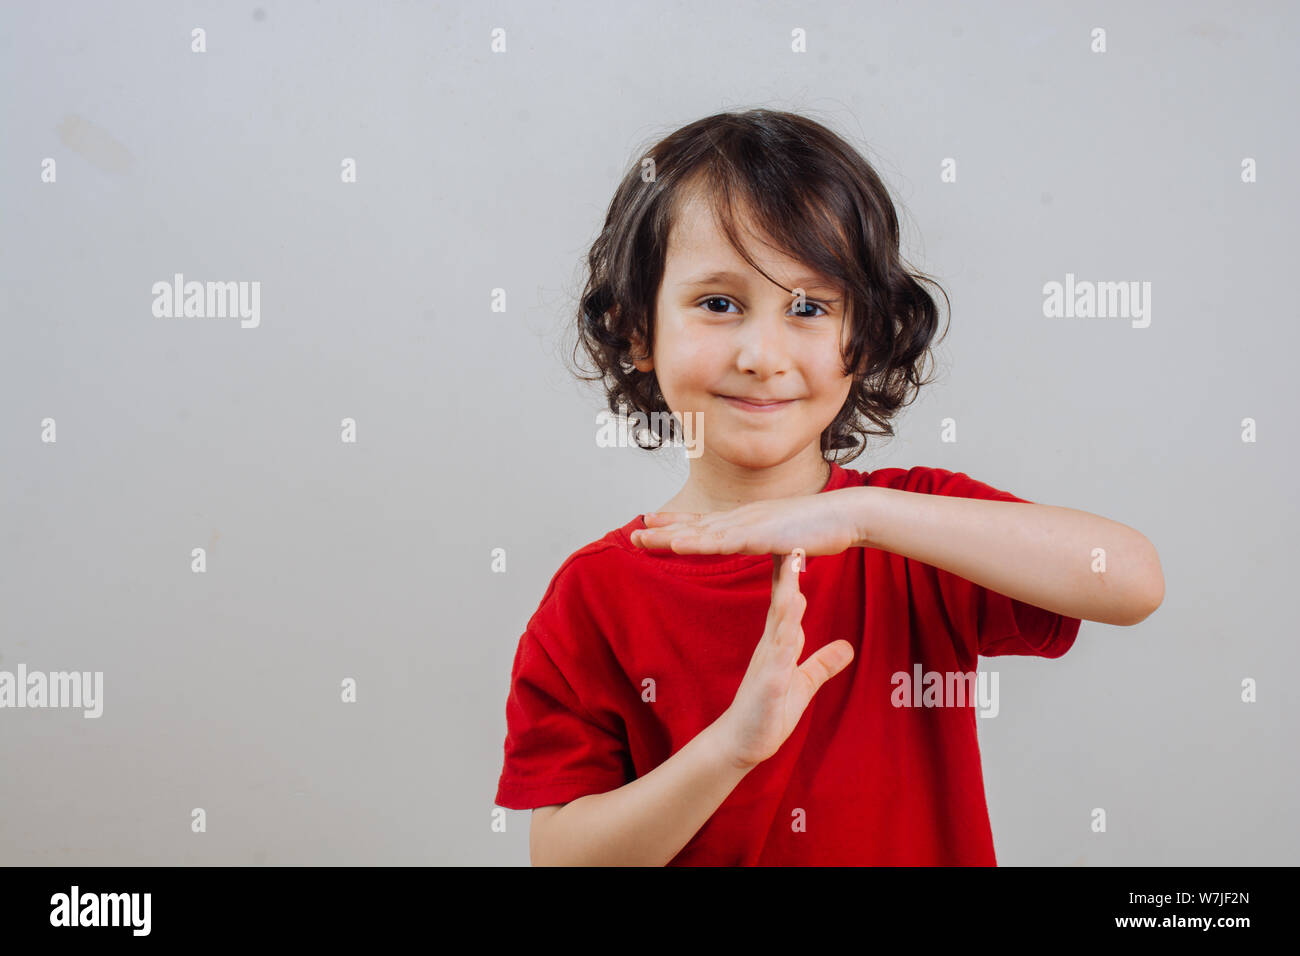 Smiling little  boy making a pause or break time hand gesture Stock Photo